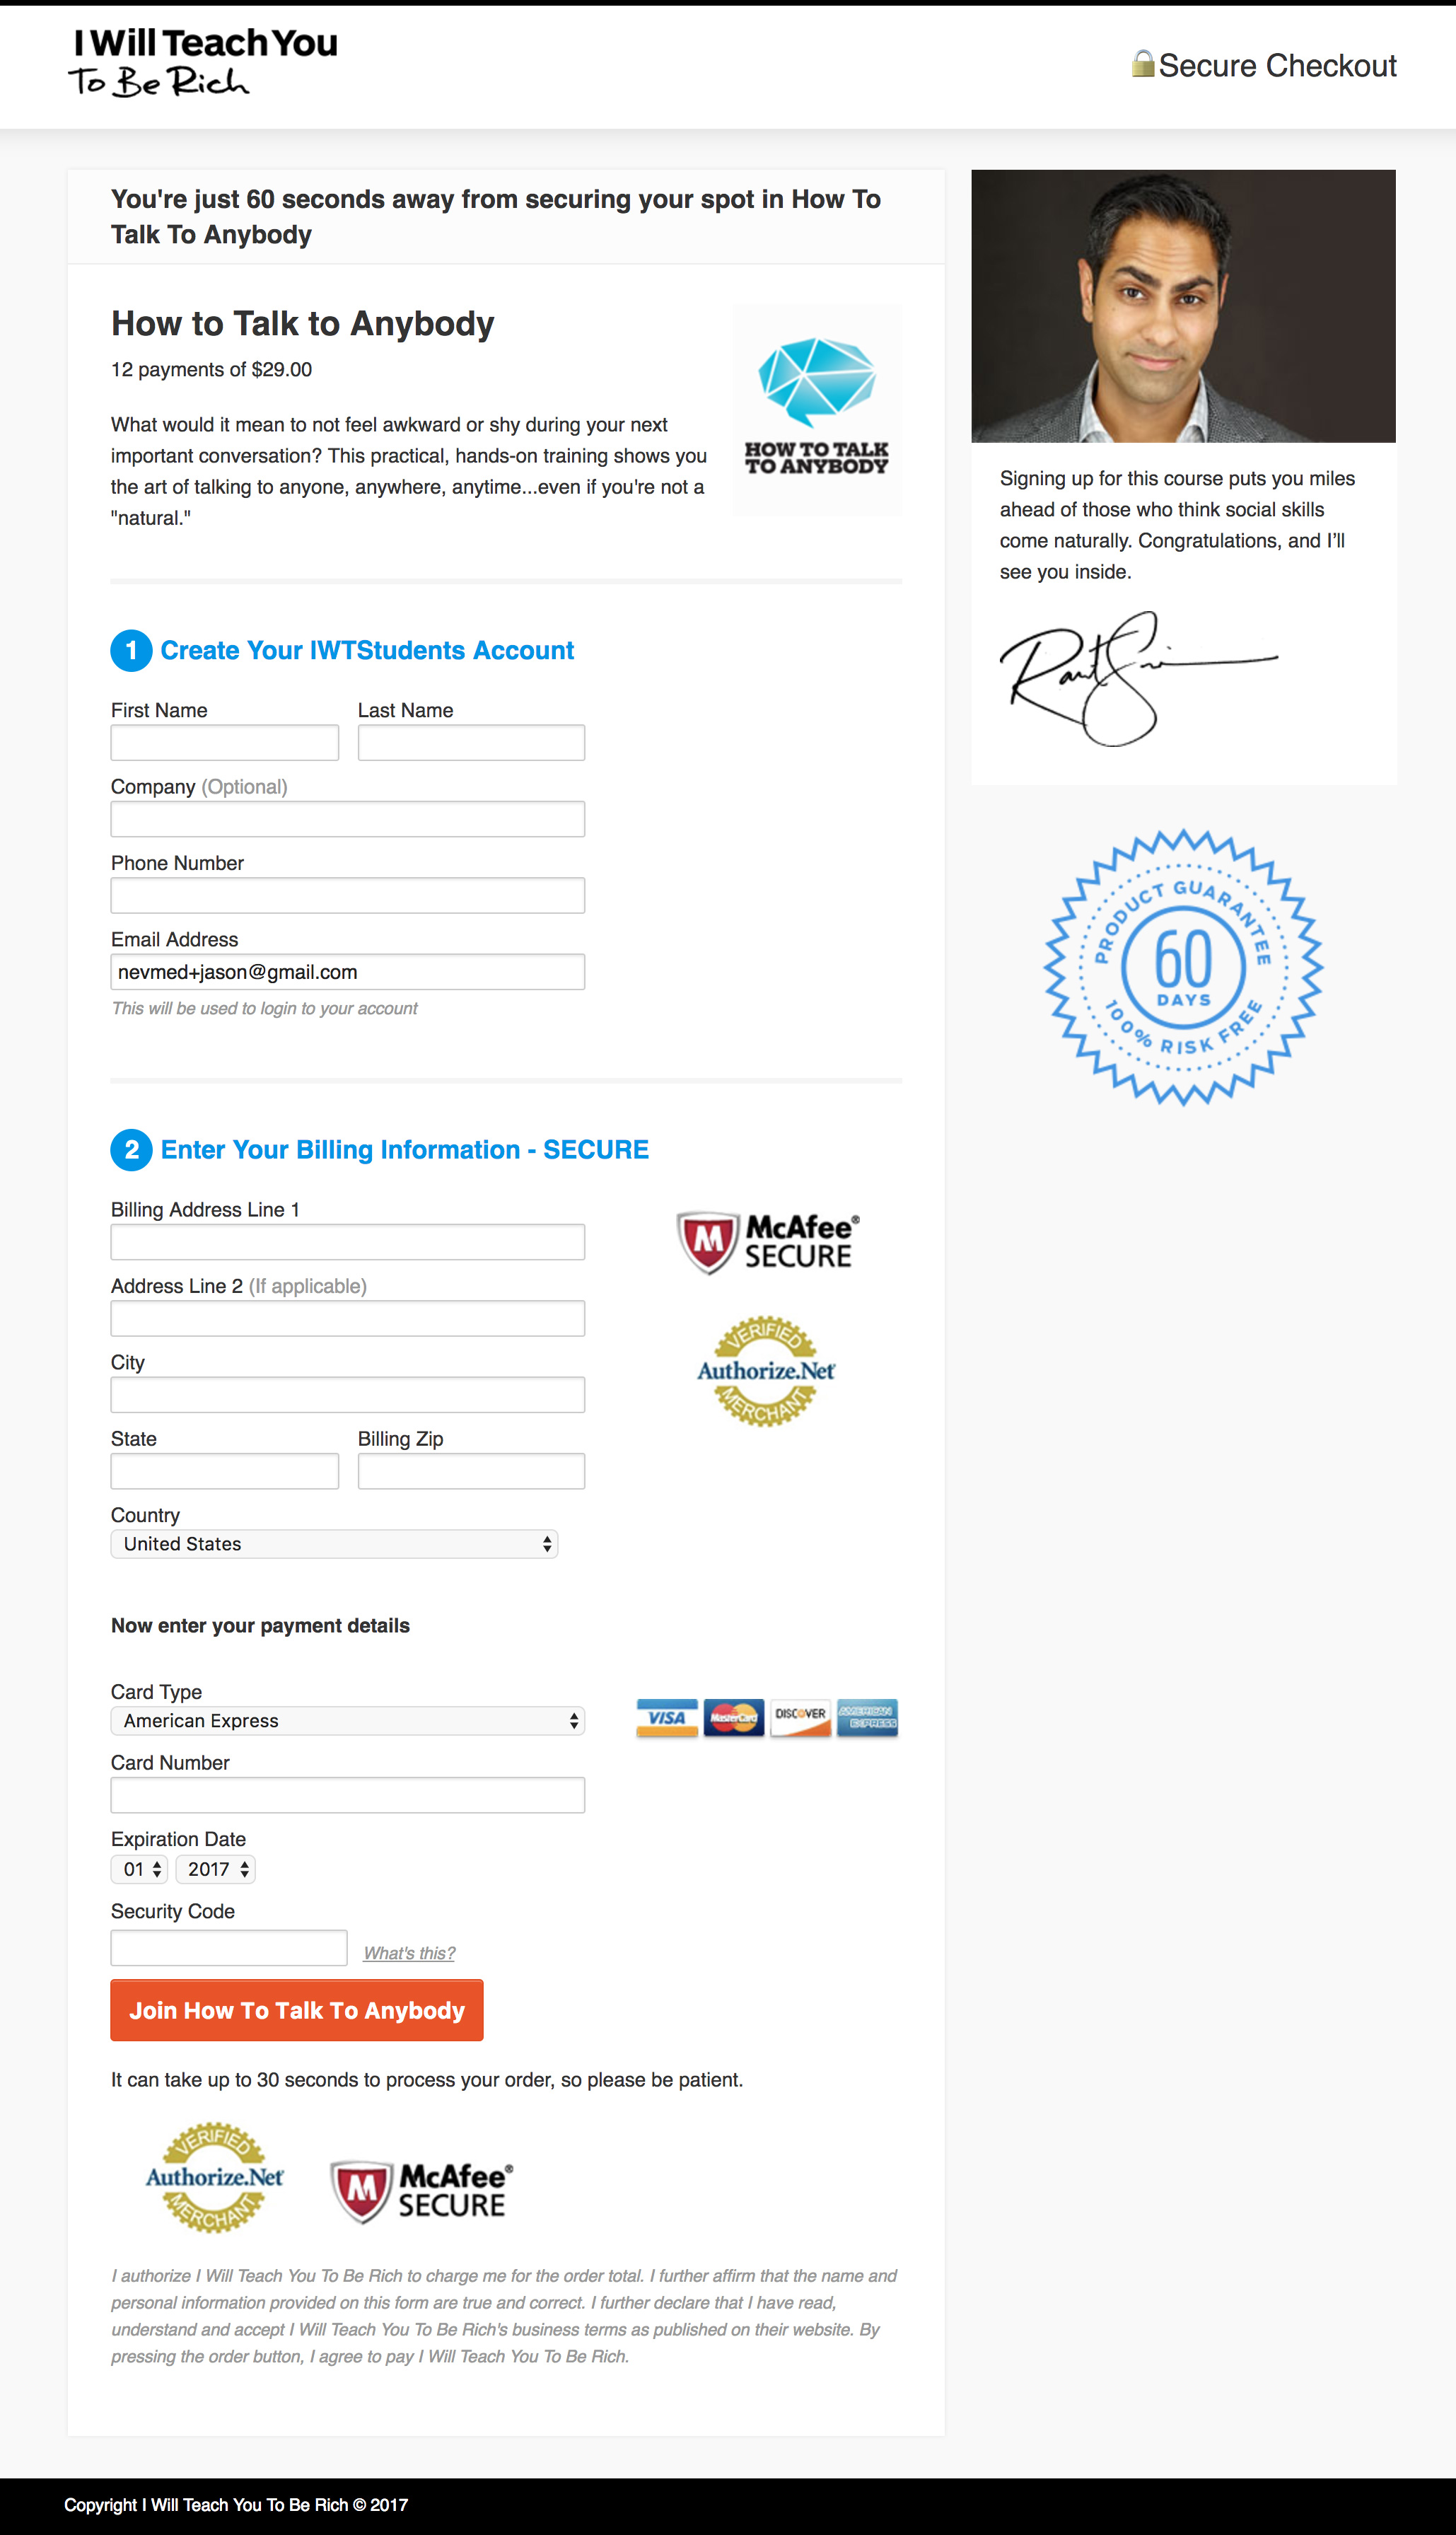 ramit how-to-talk-to-anybody-pricing-form